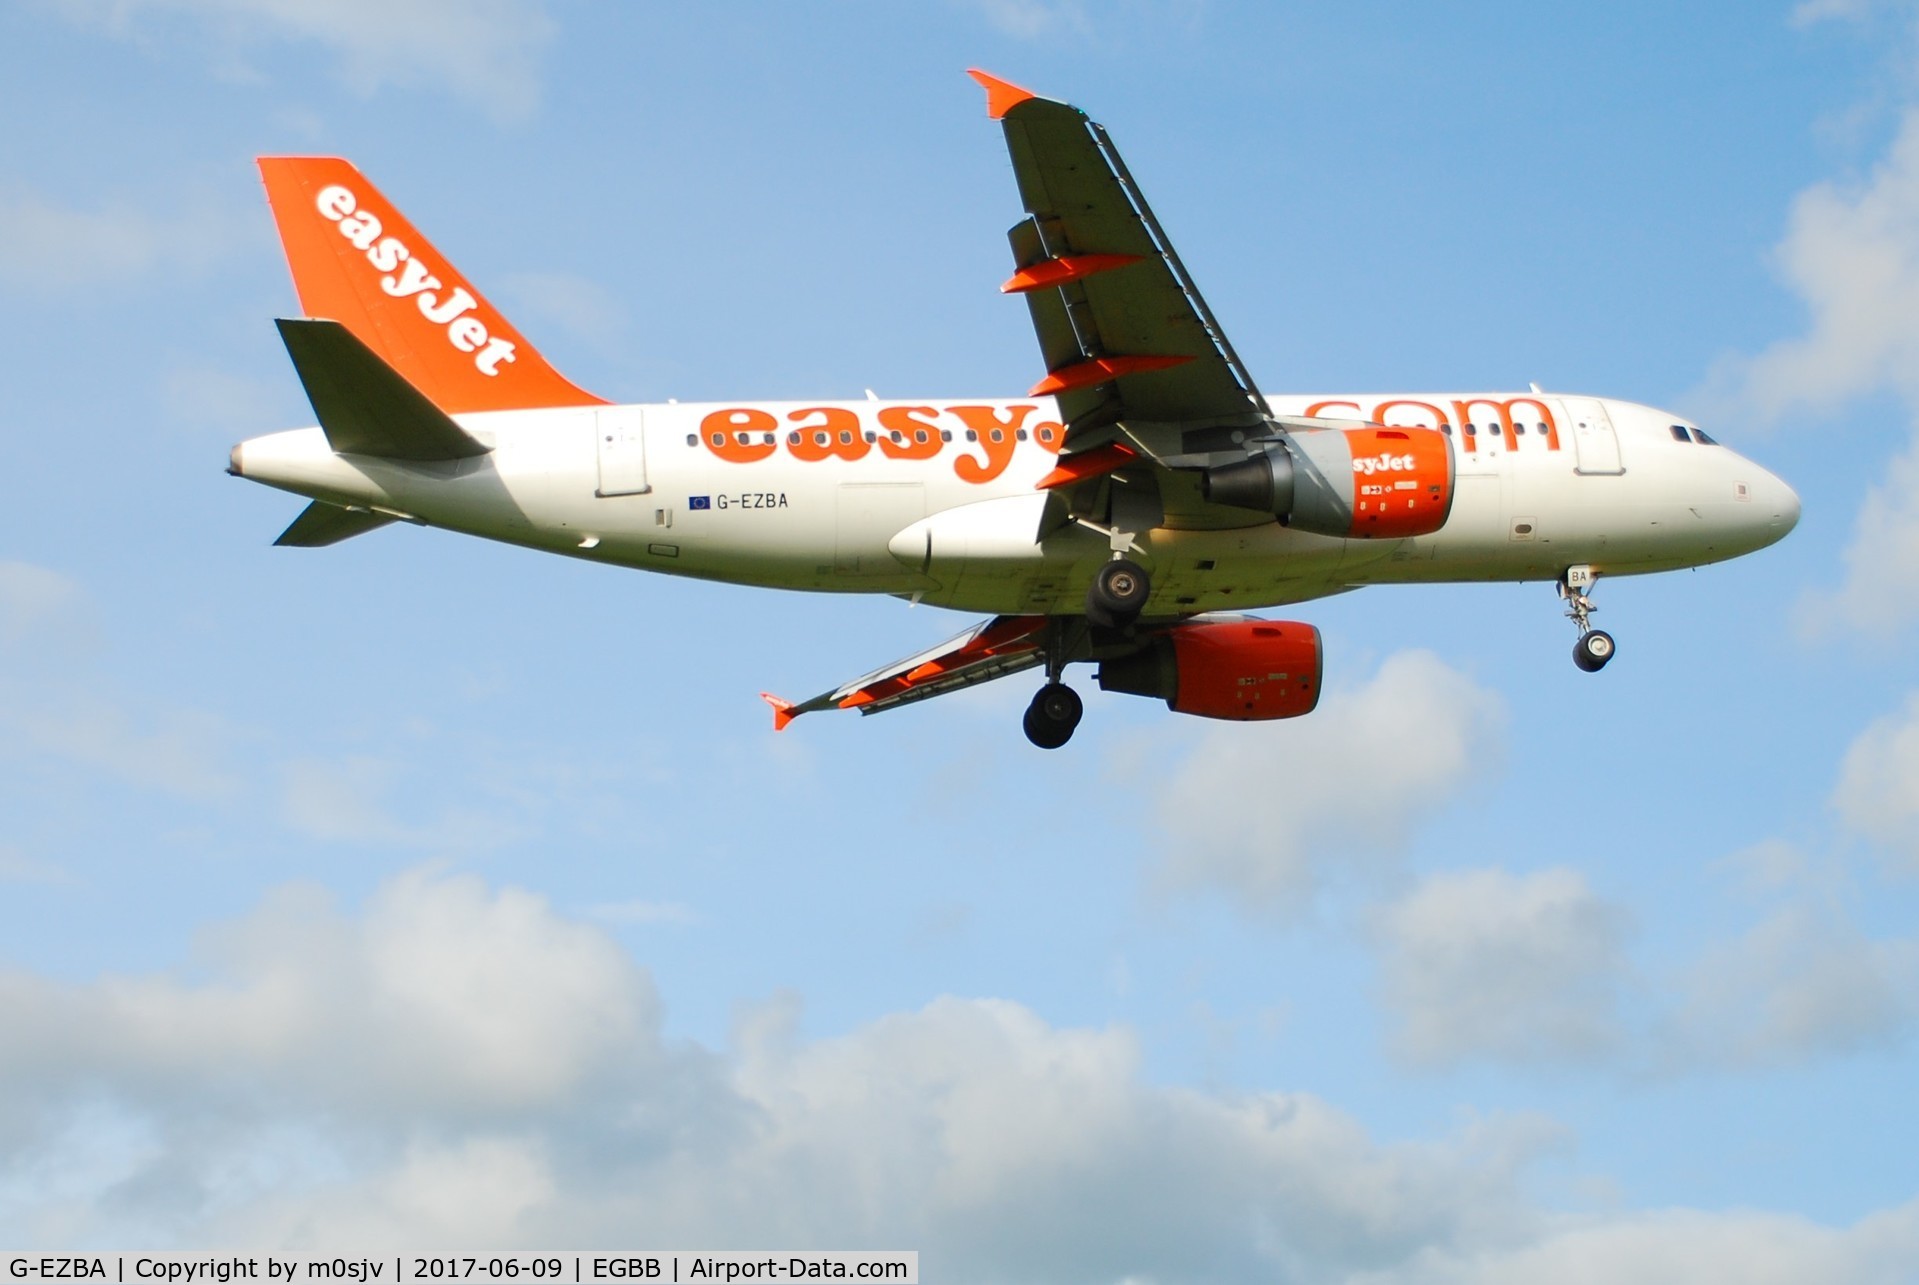 G-EZBA, 2006 Airbus A319-111 C/N 2860, From Sheldon Country Park